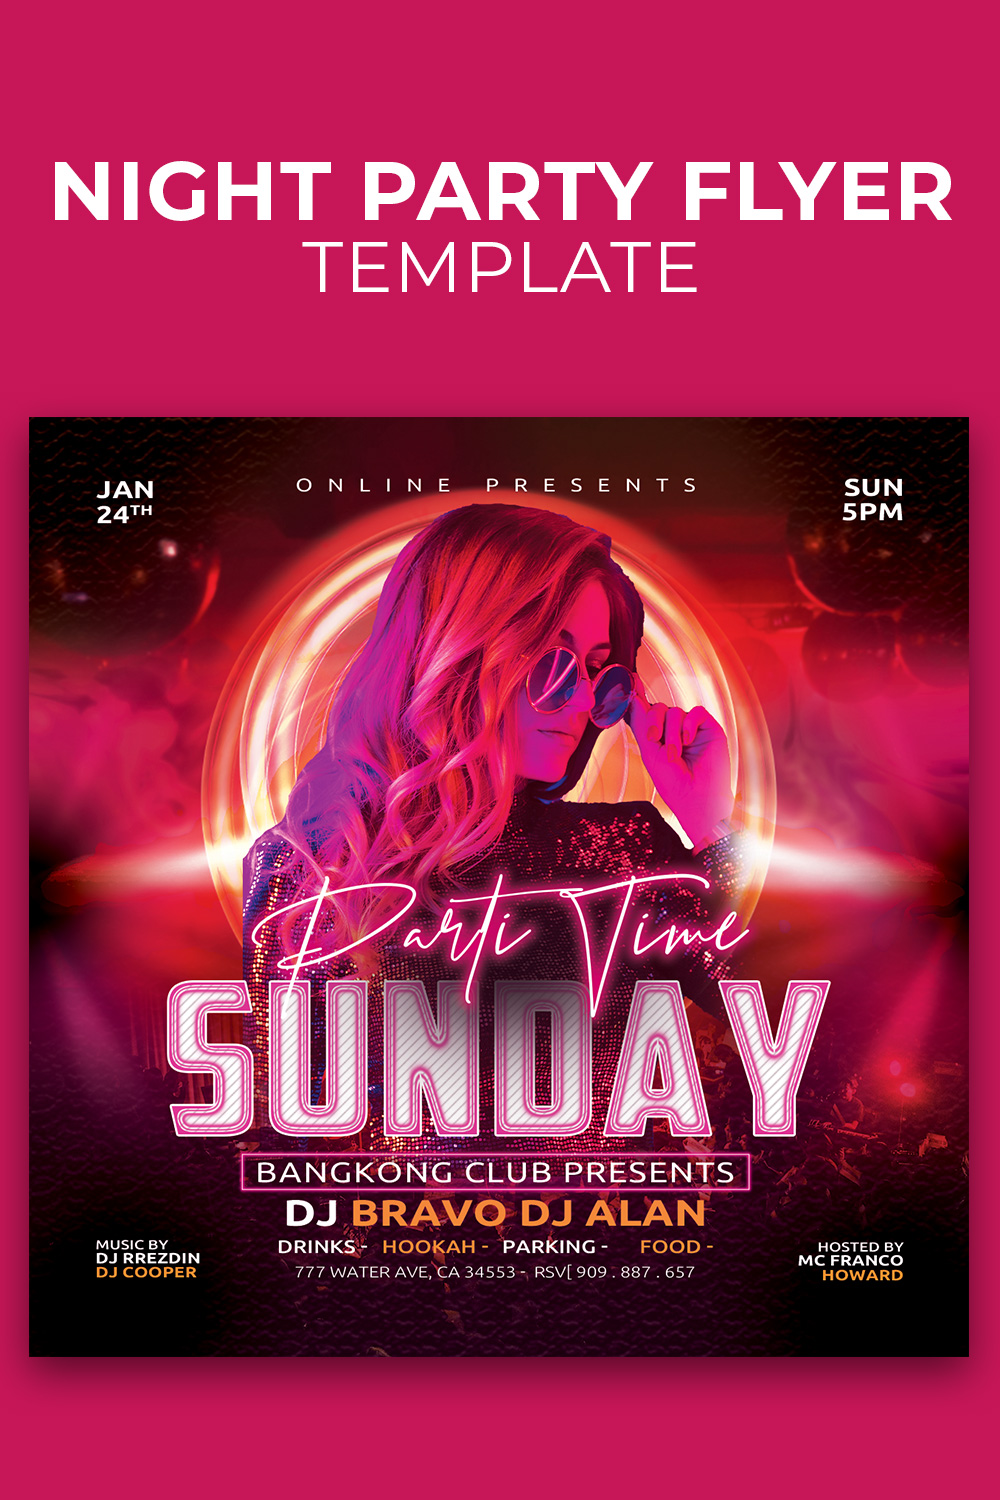 Sunday Night Party Flyer Template Psd pinterest preview image.